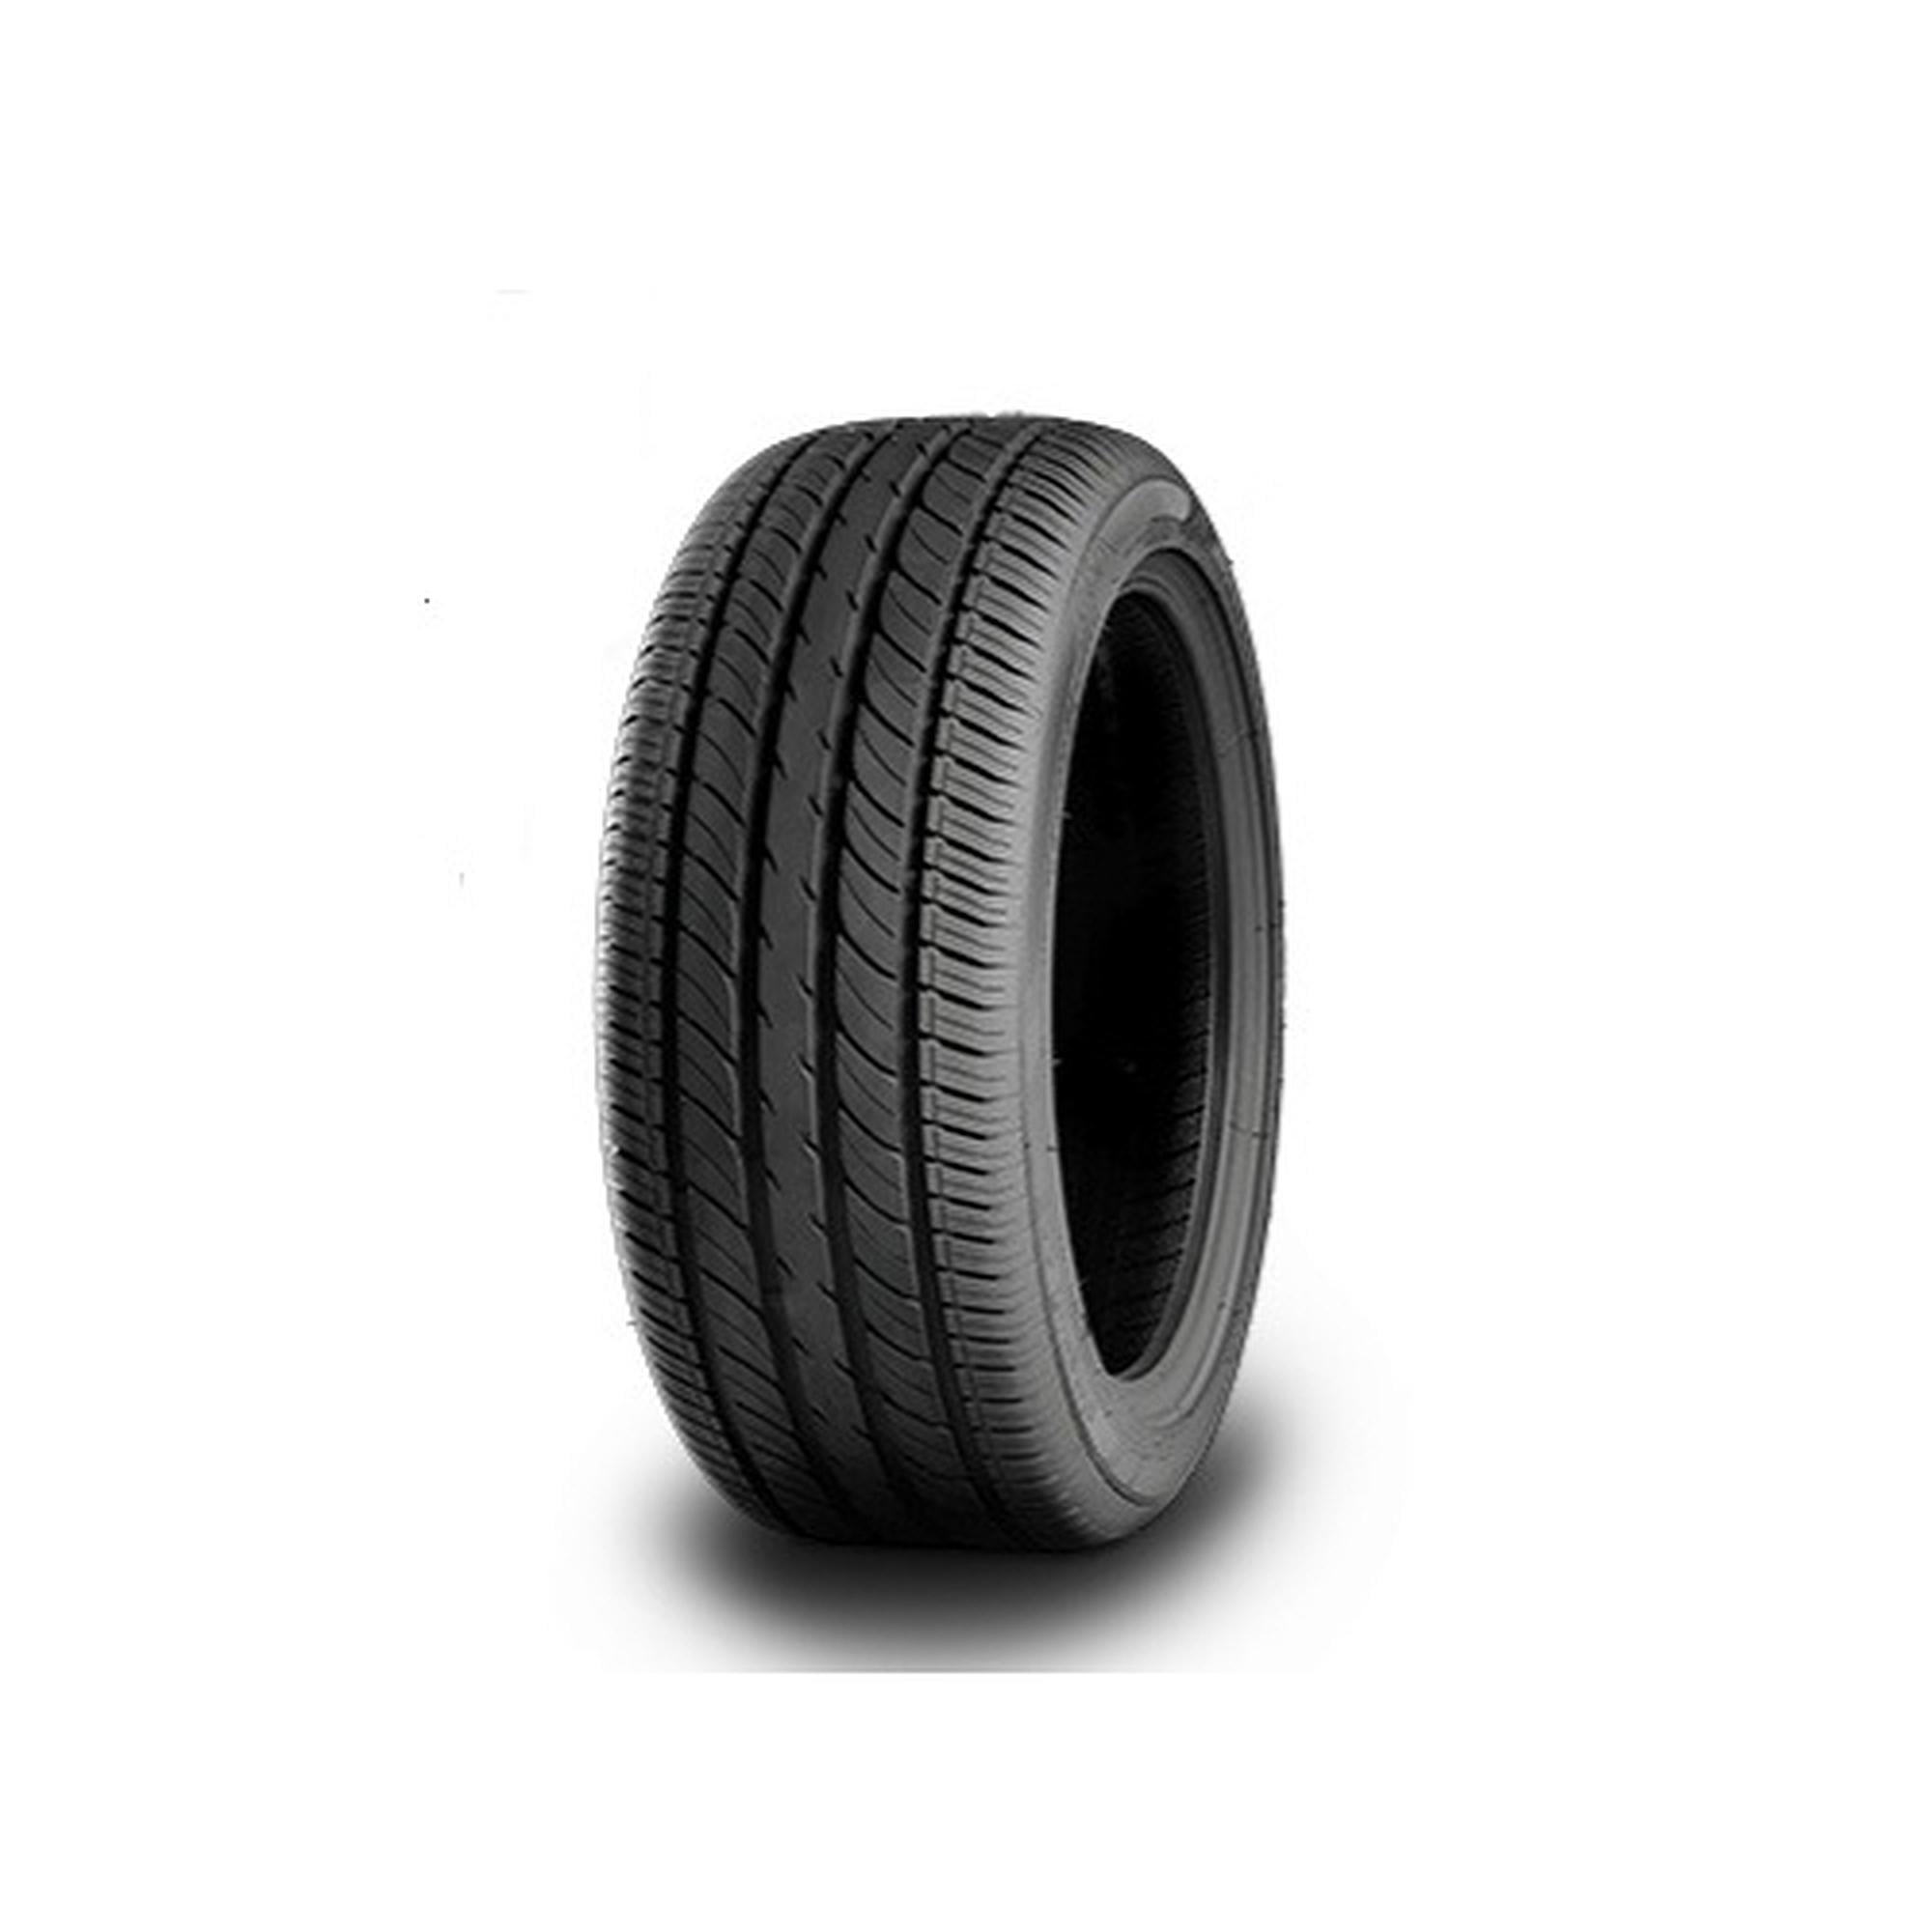 Waterfall Eco Dynamic Summer 165/70R13 79T Passenger Tire